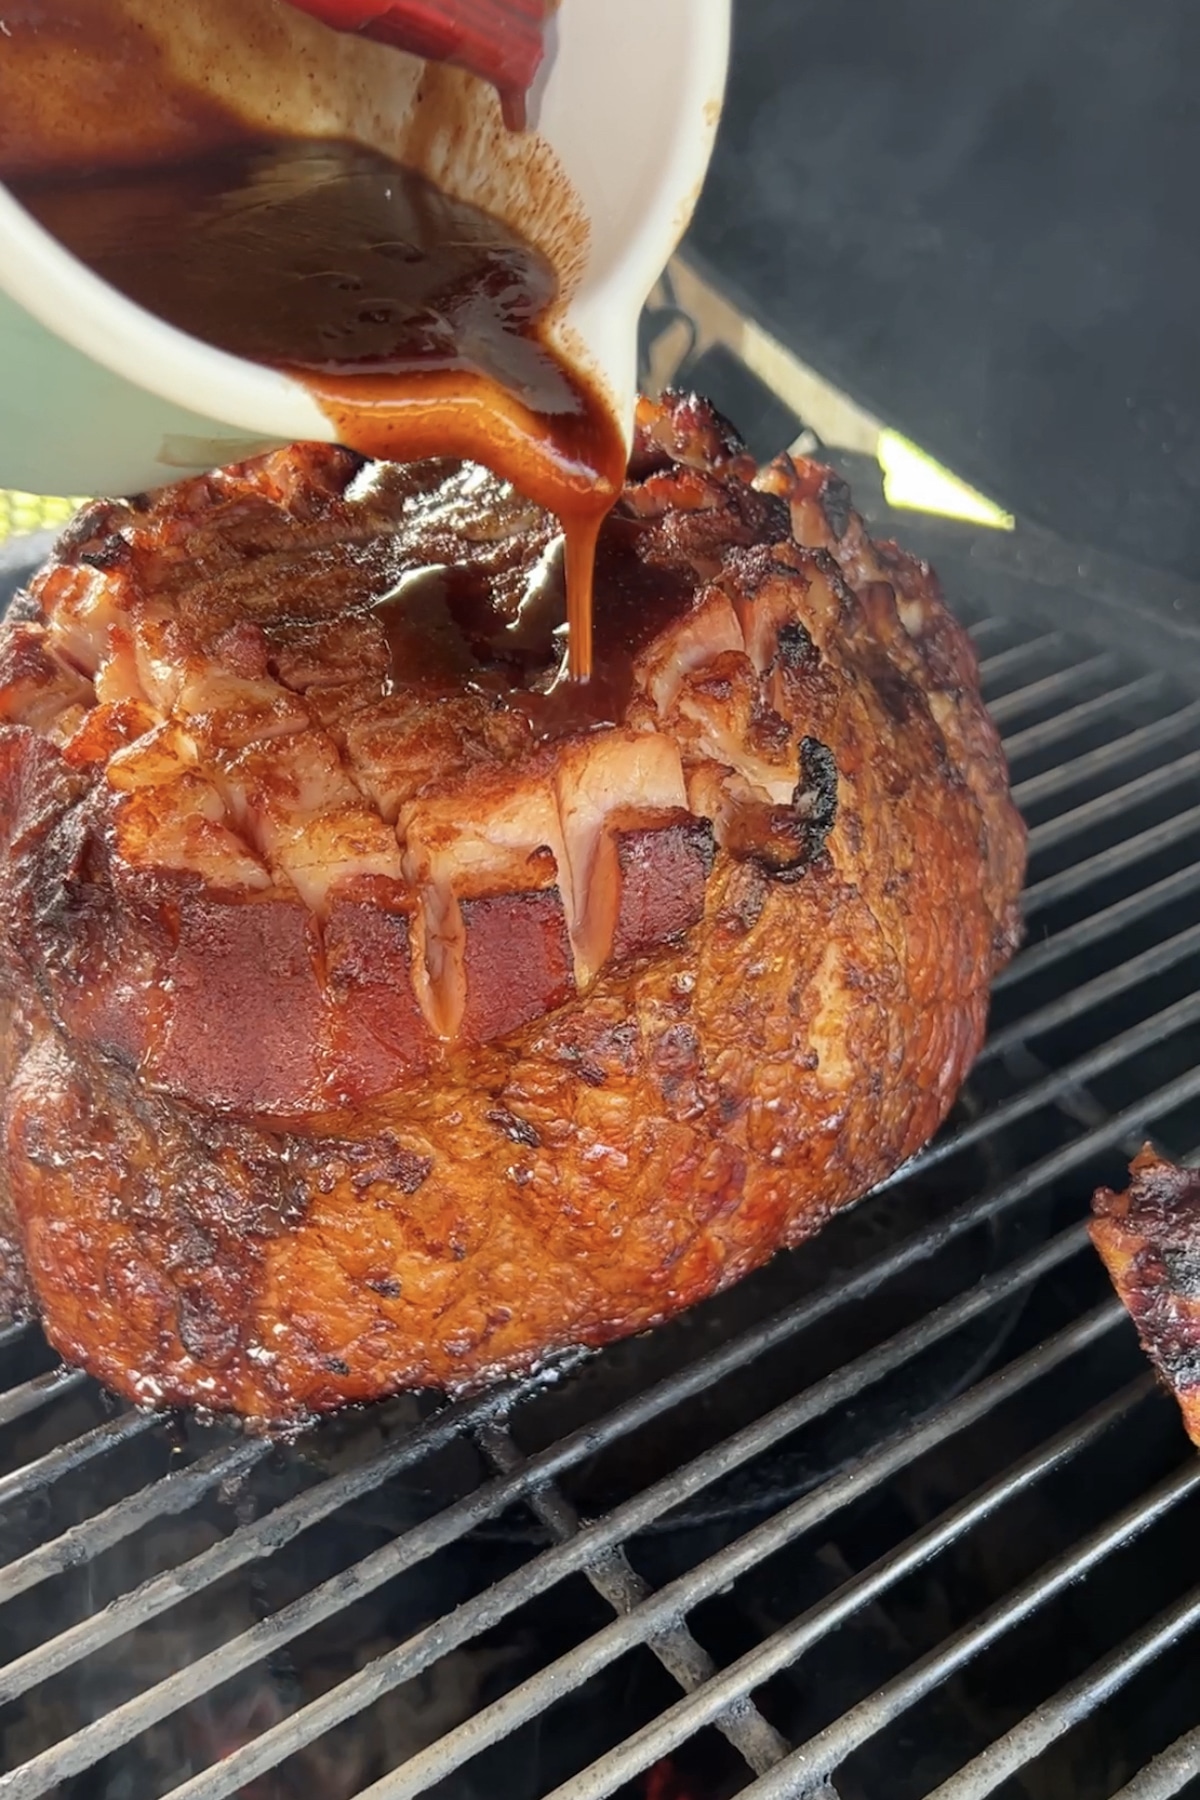 Glazing ham on a grill with blackberry sauce.